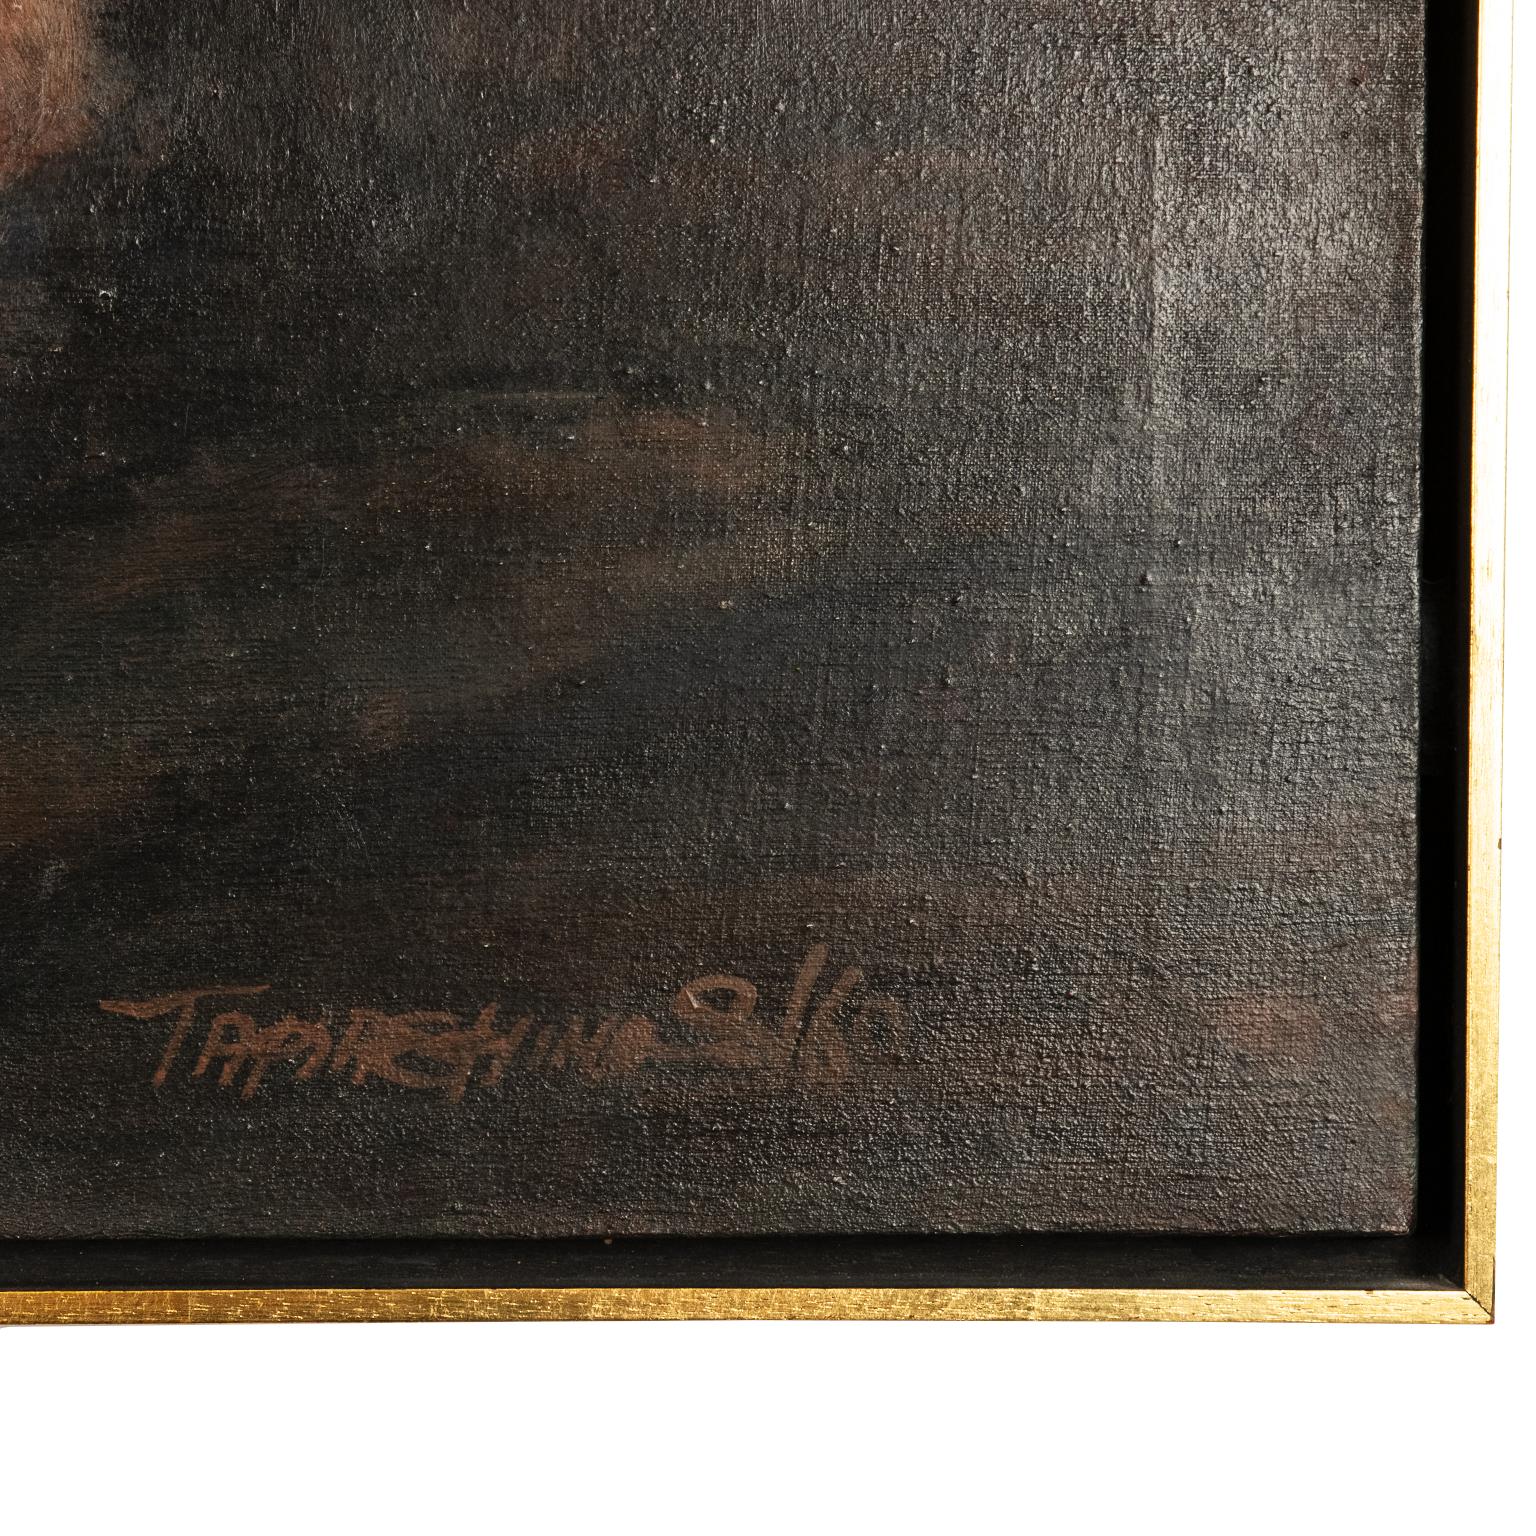 This compelling painting of a cuddling couple in sleep is painted in rich dark tones of brown, black and red. It is signed  ( I cannot decipher the name) and dated 1960.
It is nicely framed in its original period frame. A beautiful decorative